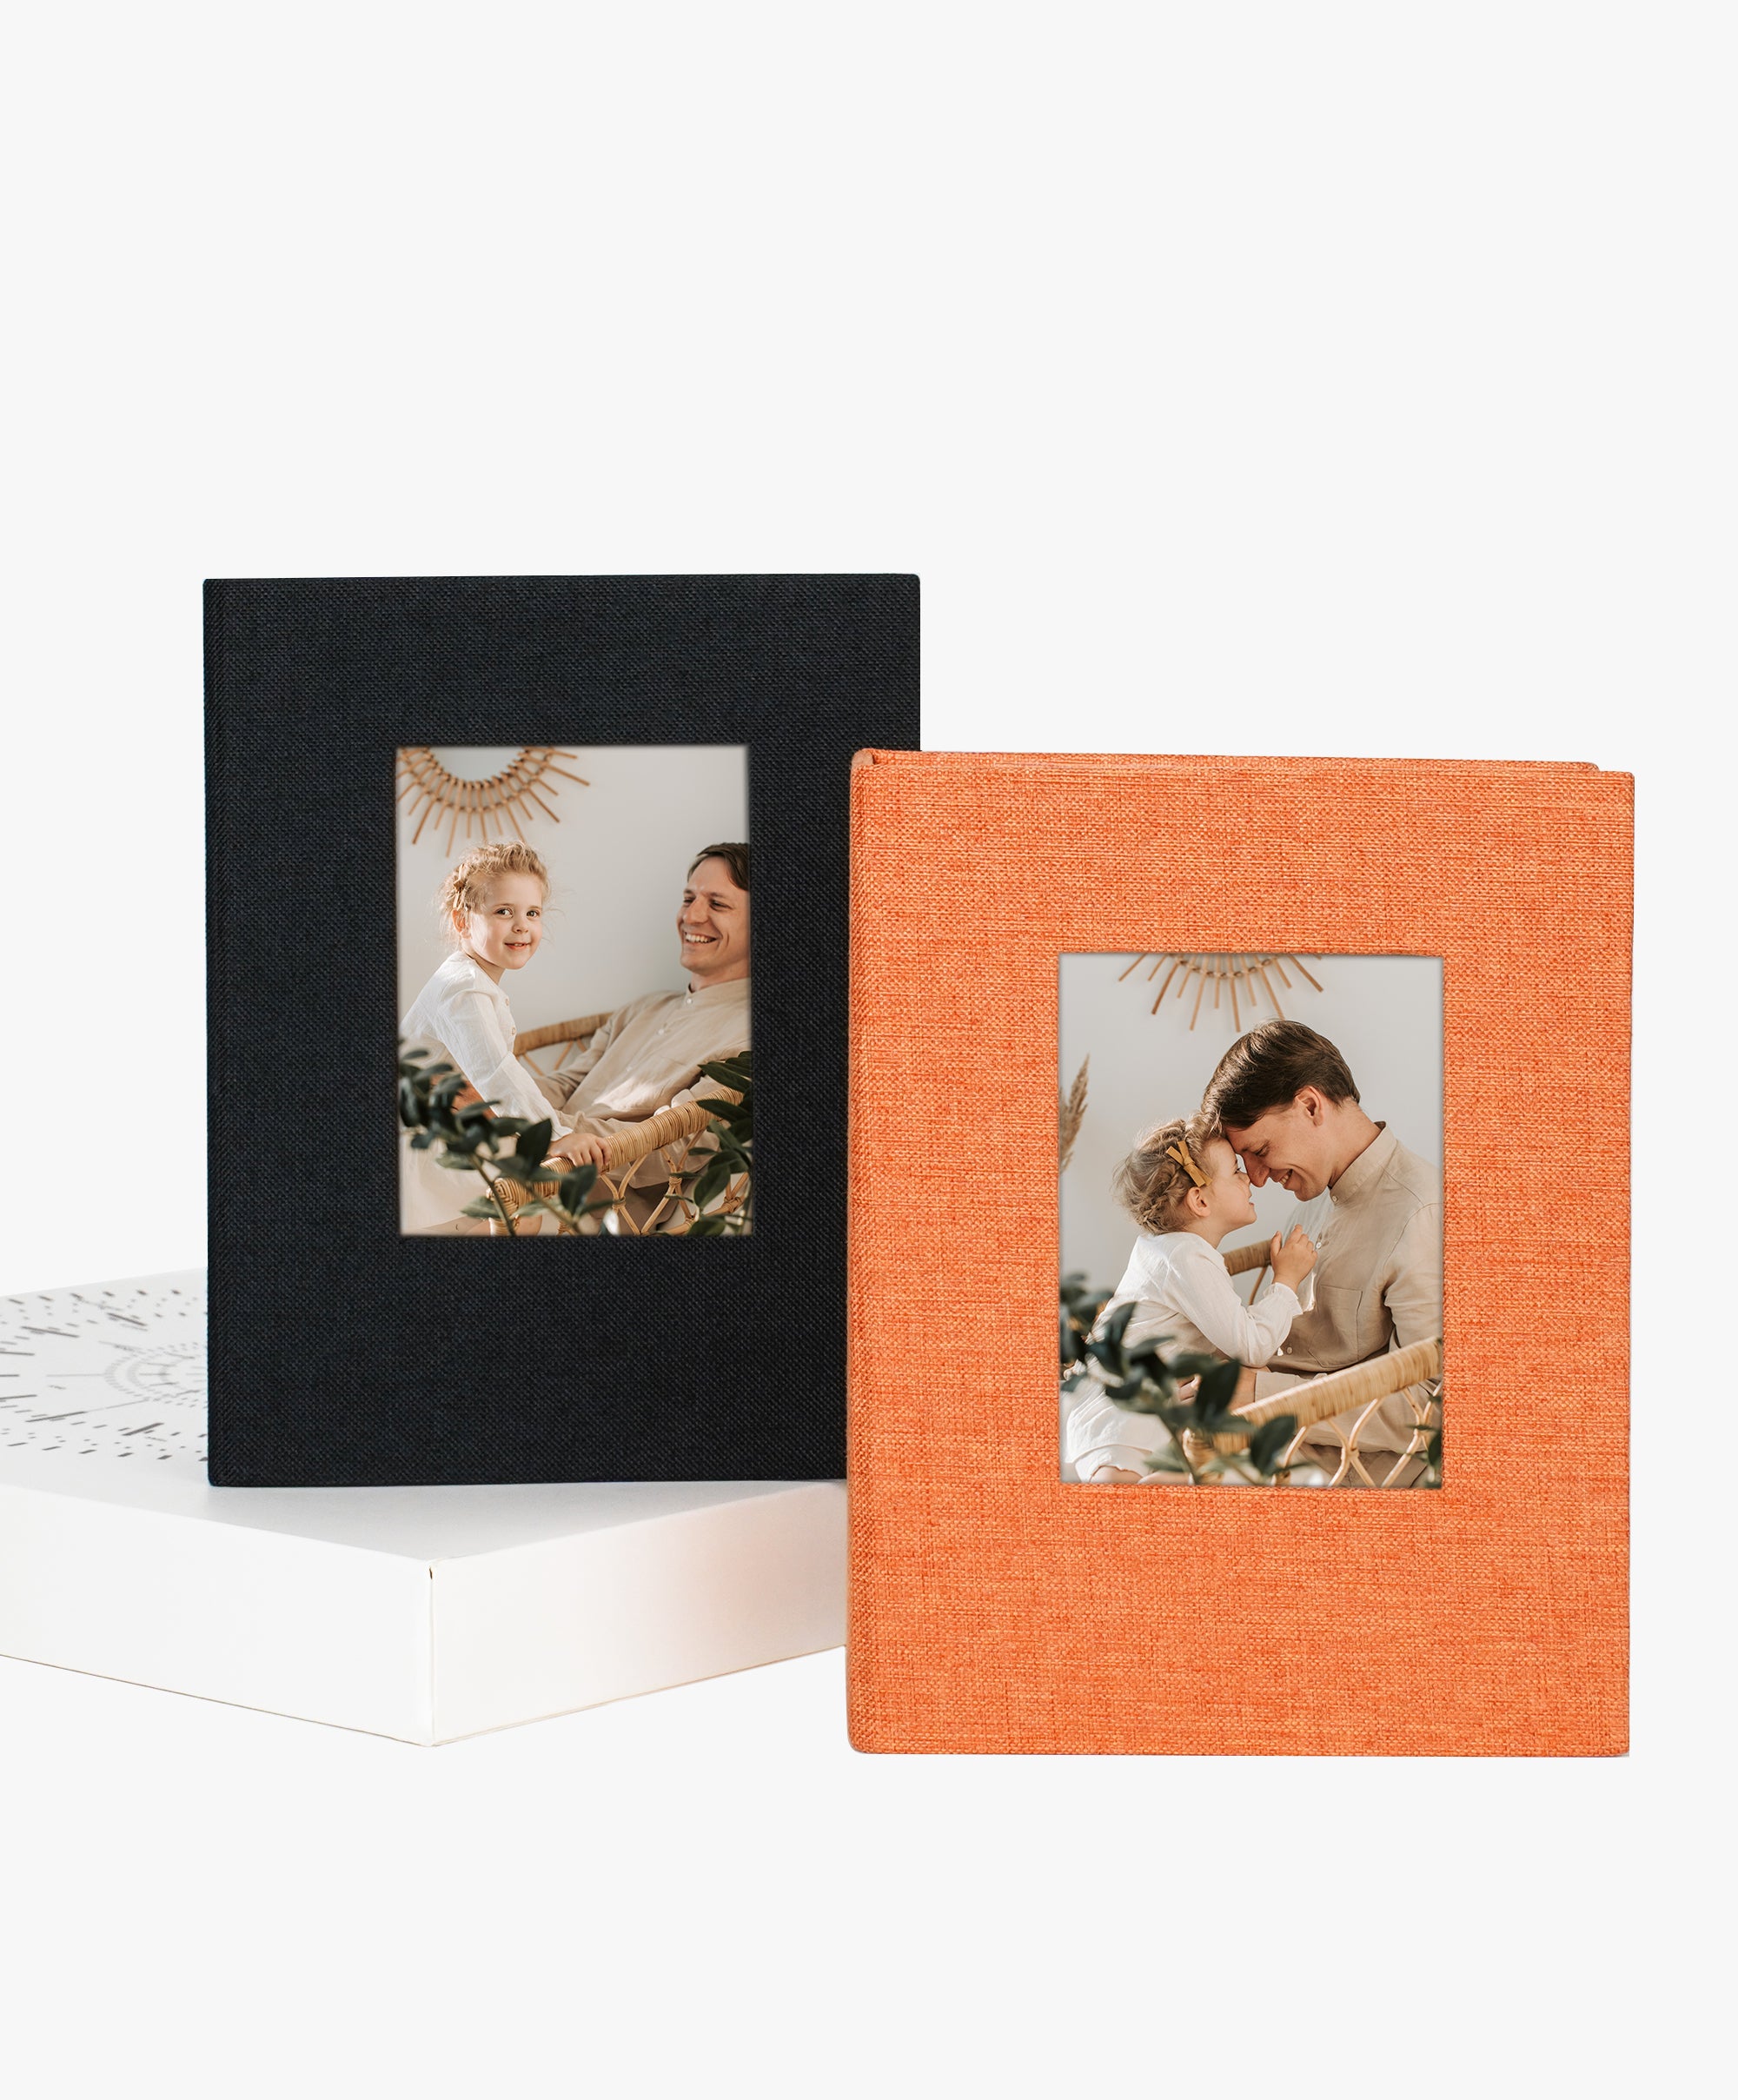  5x7 Photo Album Hold 52 Pictures - 2 Pack, Small Photo